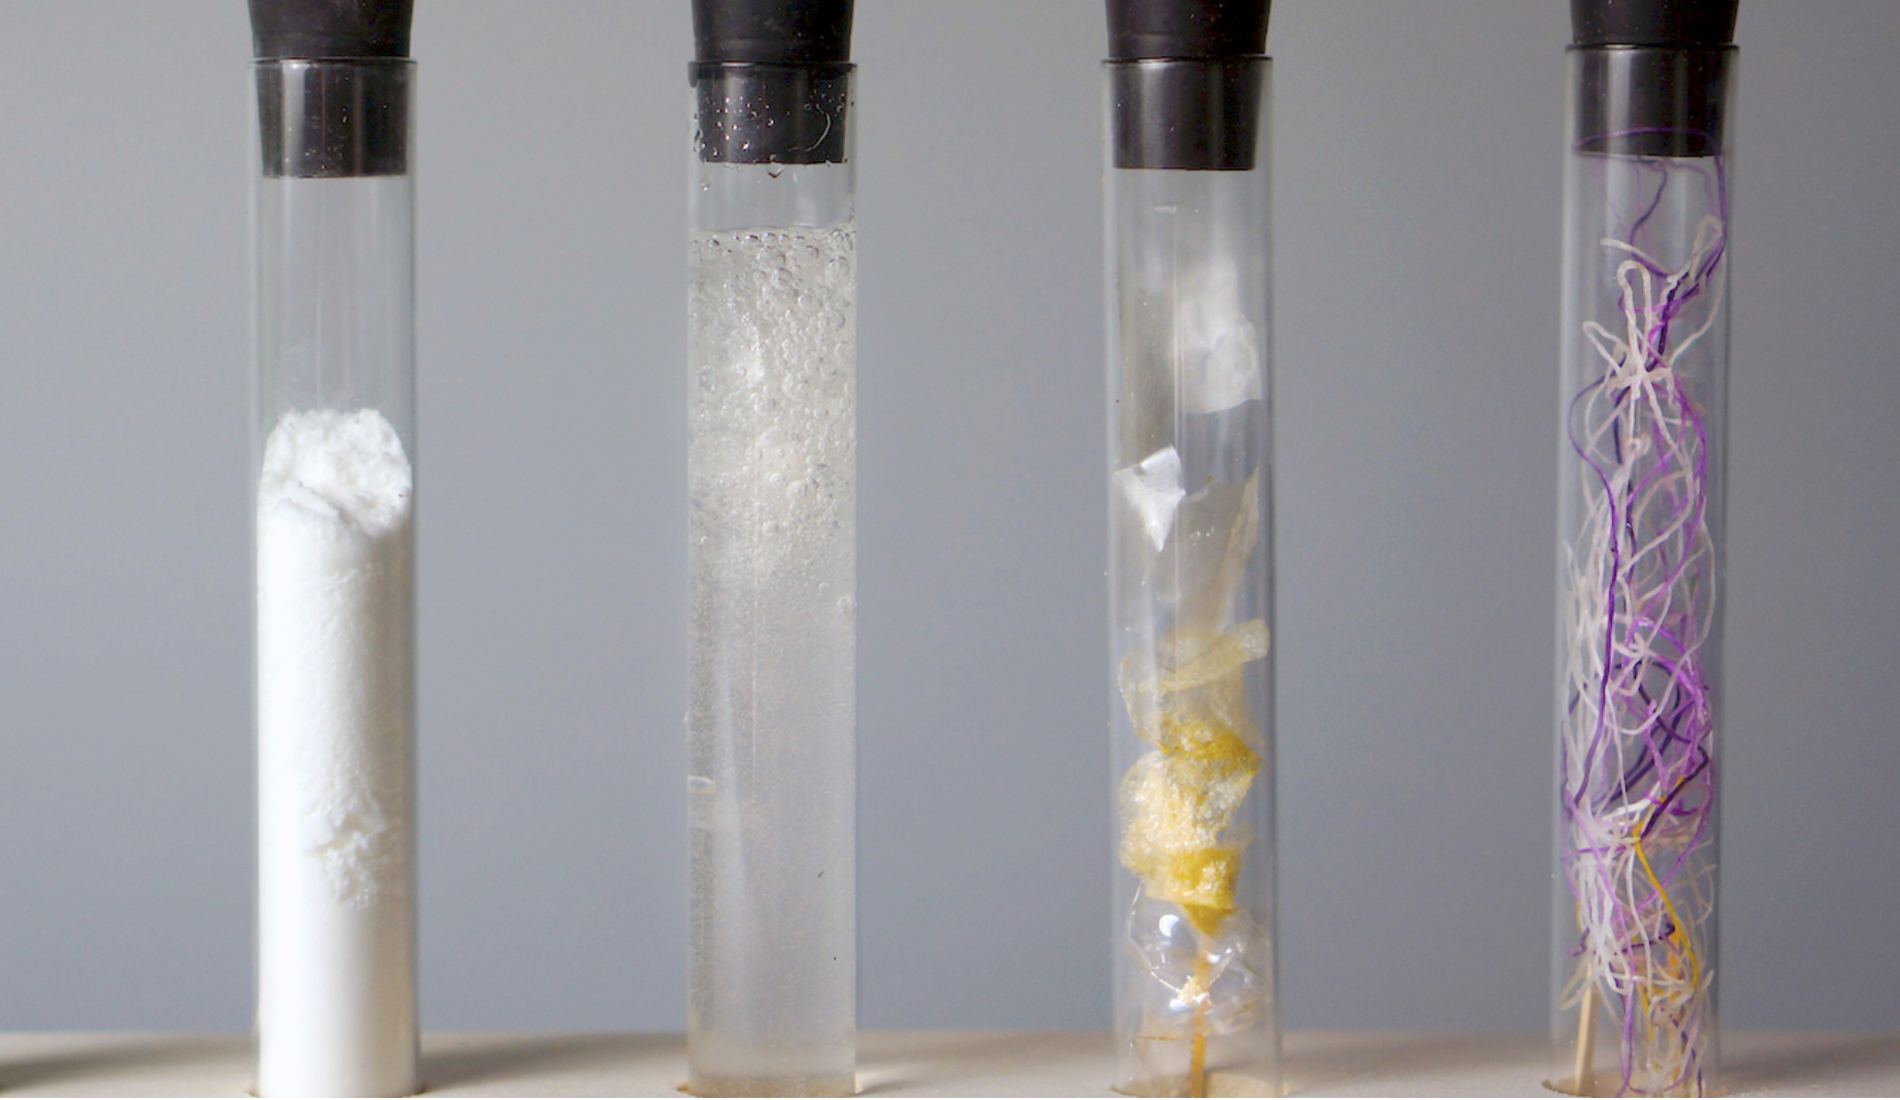 Image of test tubes containing microorganisms and biofabricated fibre by Algiknit